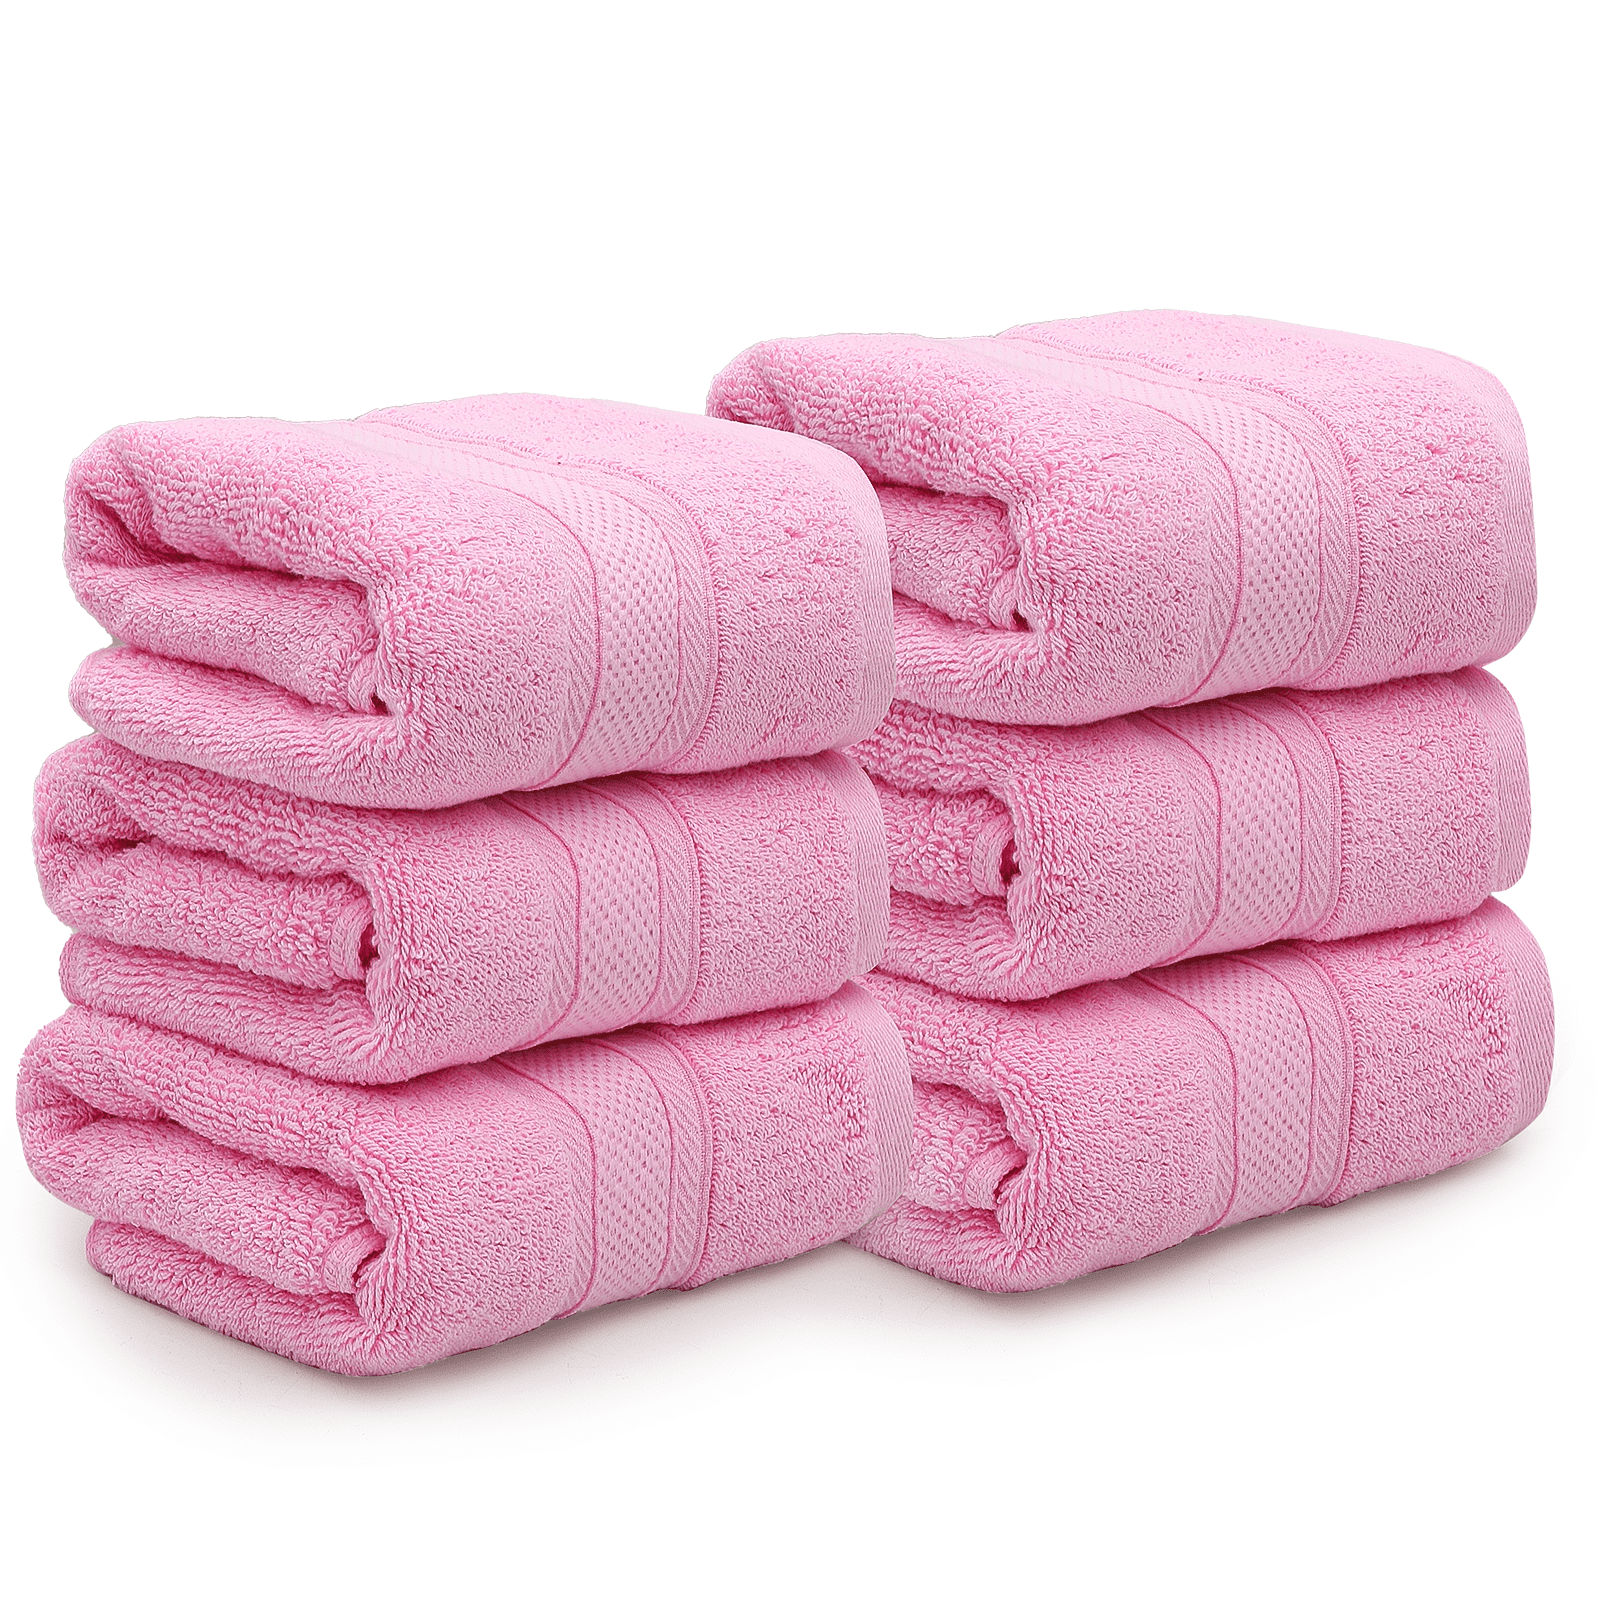 COTTON CRAFT Ultra Soft Hand Towels - 6 Pack - 16x28-100% Cotton Face  Towels - Absorbent Quick Dry Everyday Luxury Hotel Bathroom Kitchen Spa Gym